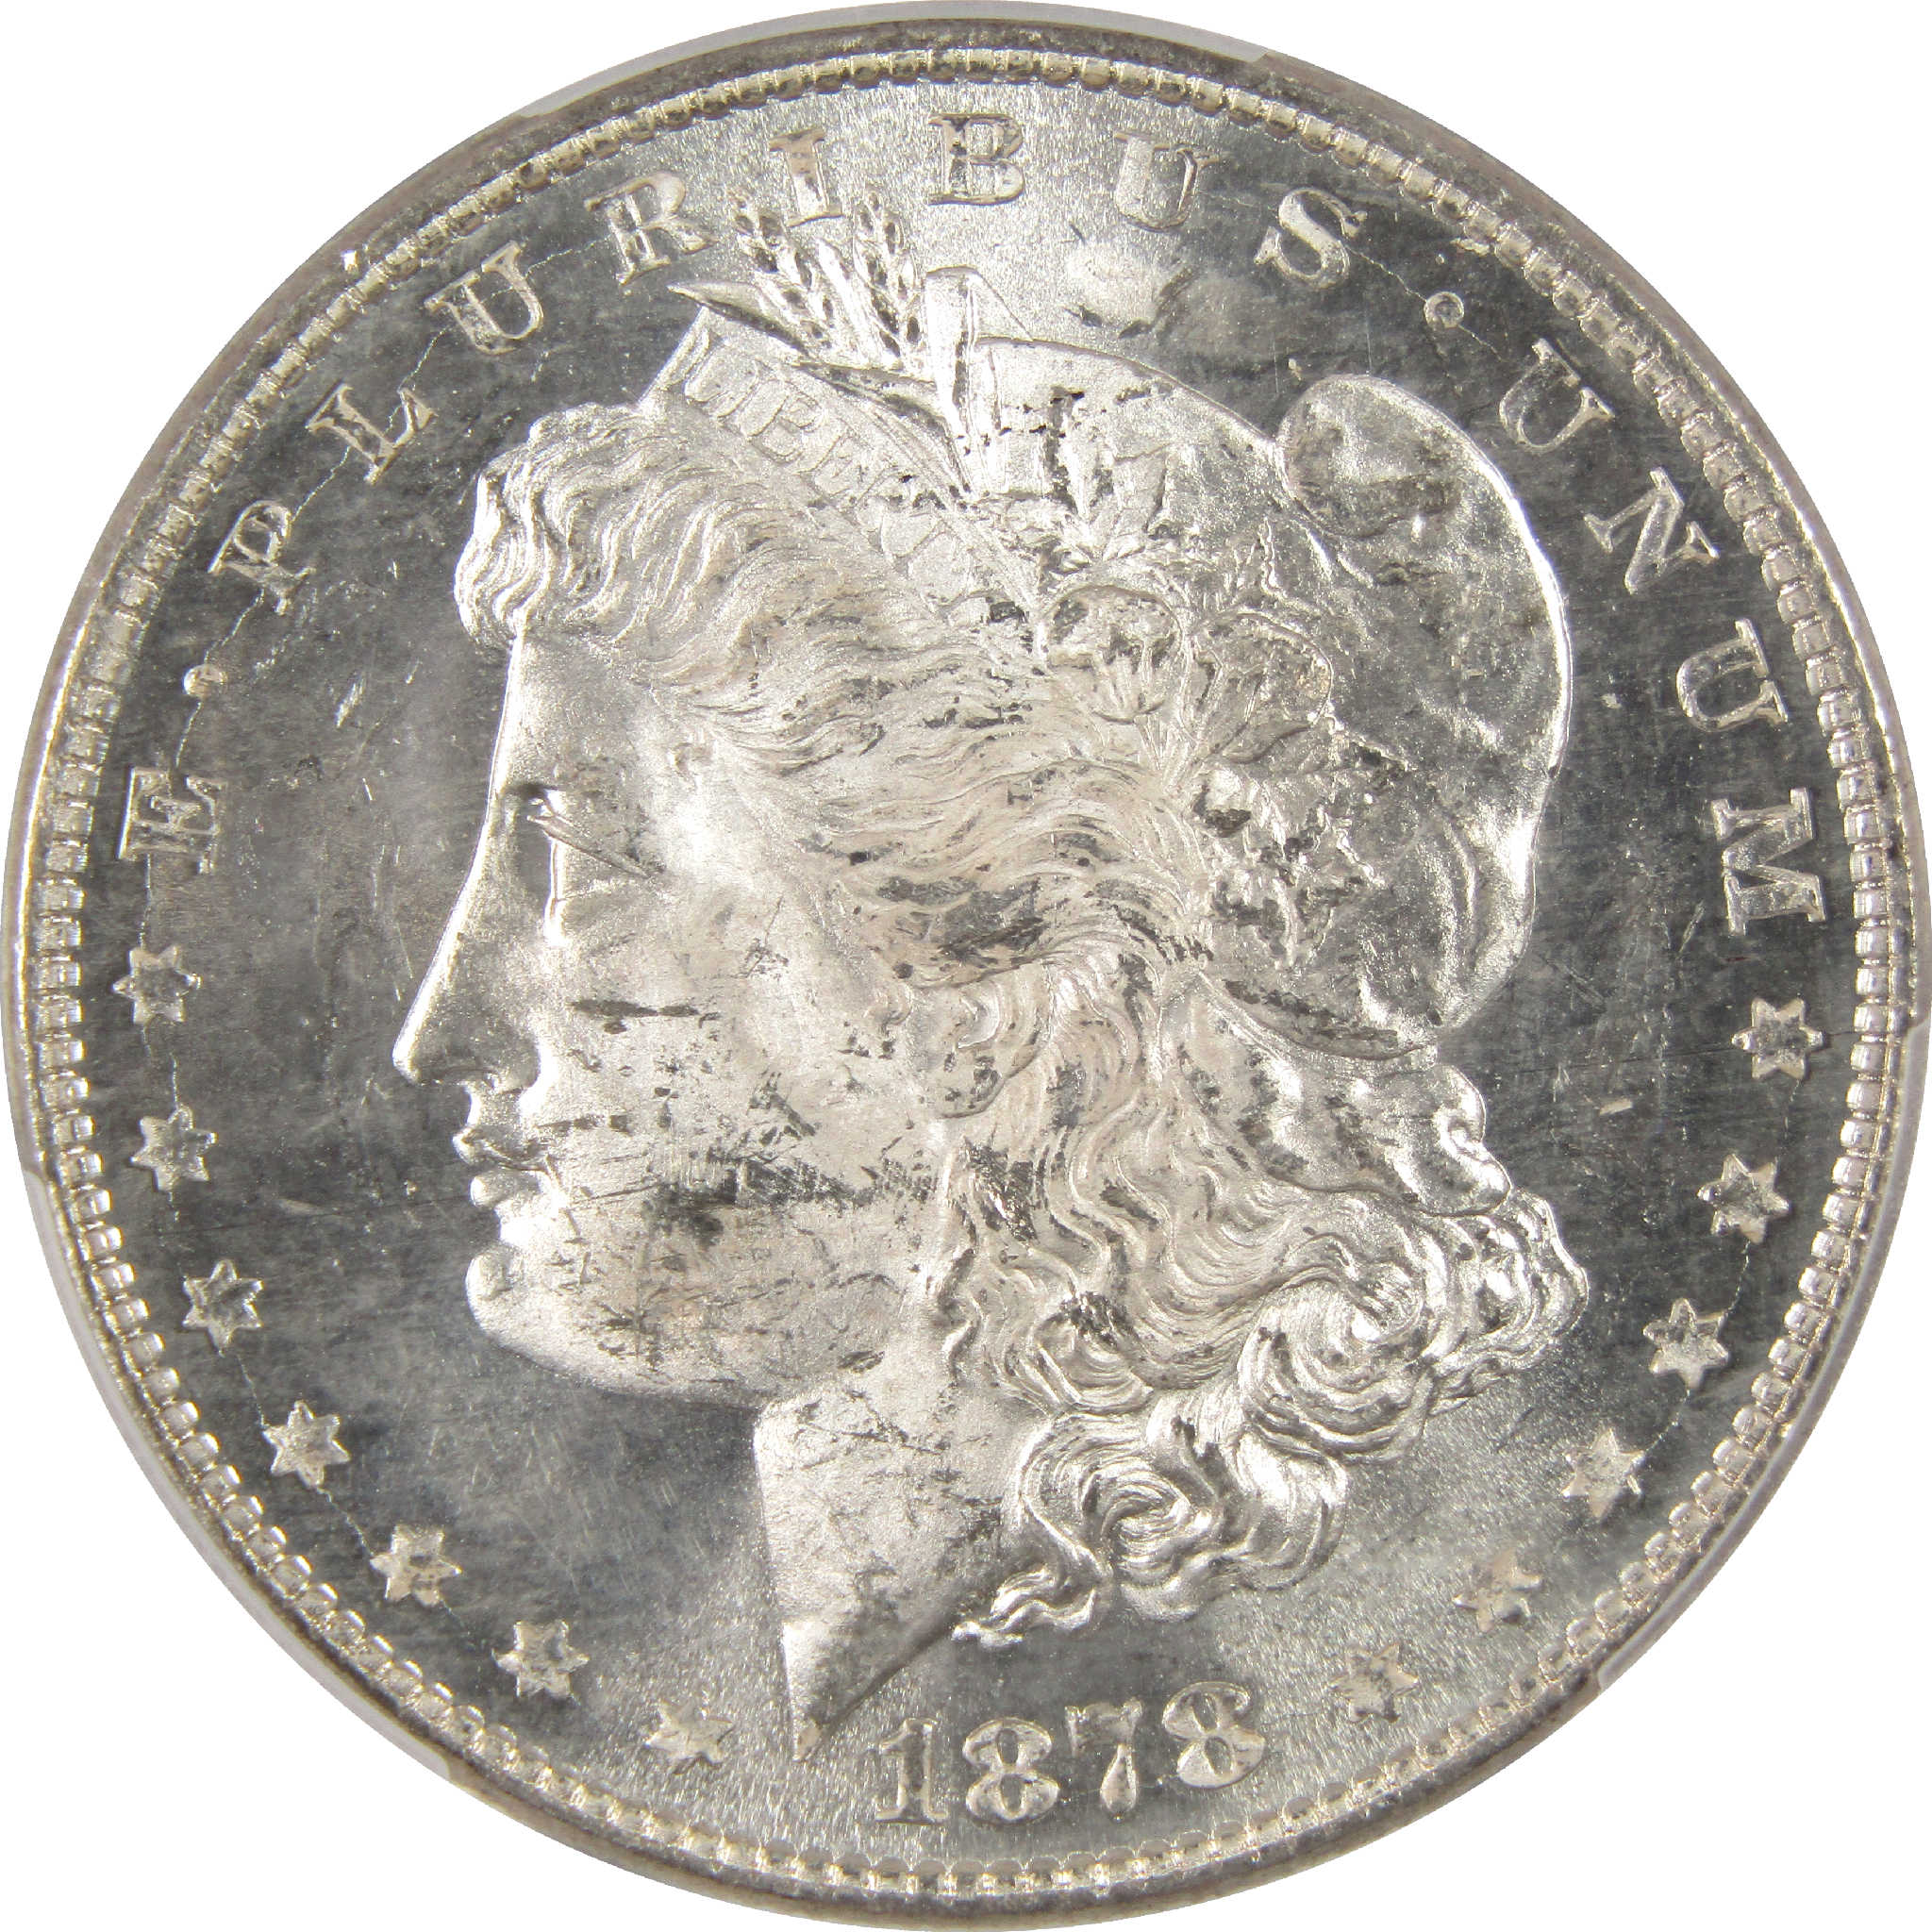 1878 8TF Morgan Dollar MS 63 PCGS Silver $1 Uncirculated SKU:I11319 - Morgan coin - Morgan silver dollar - Morgan silver dollar for sale - Profile Coins &amp; Collectibles